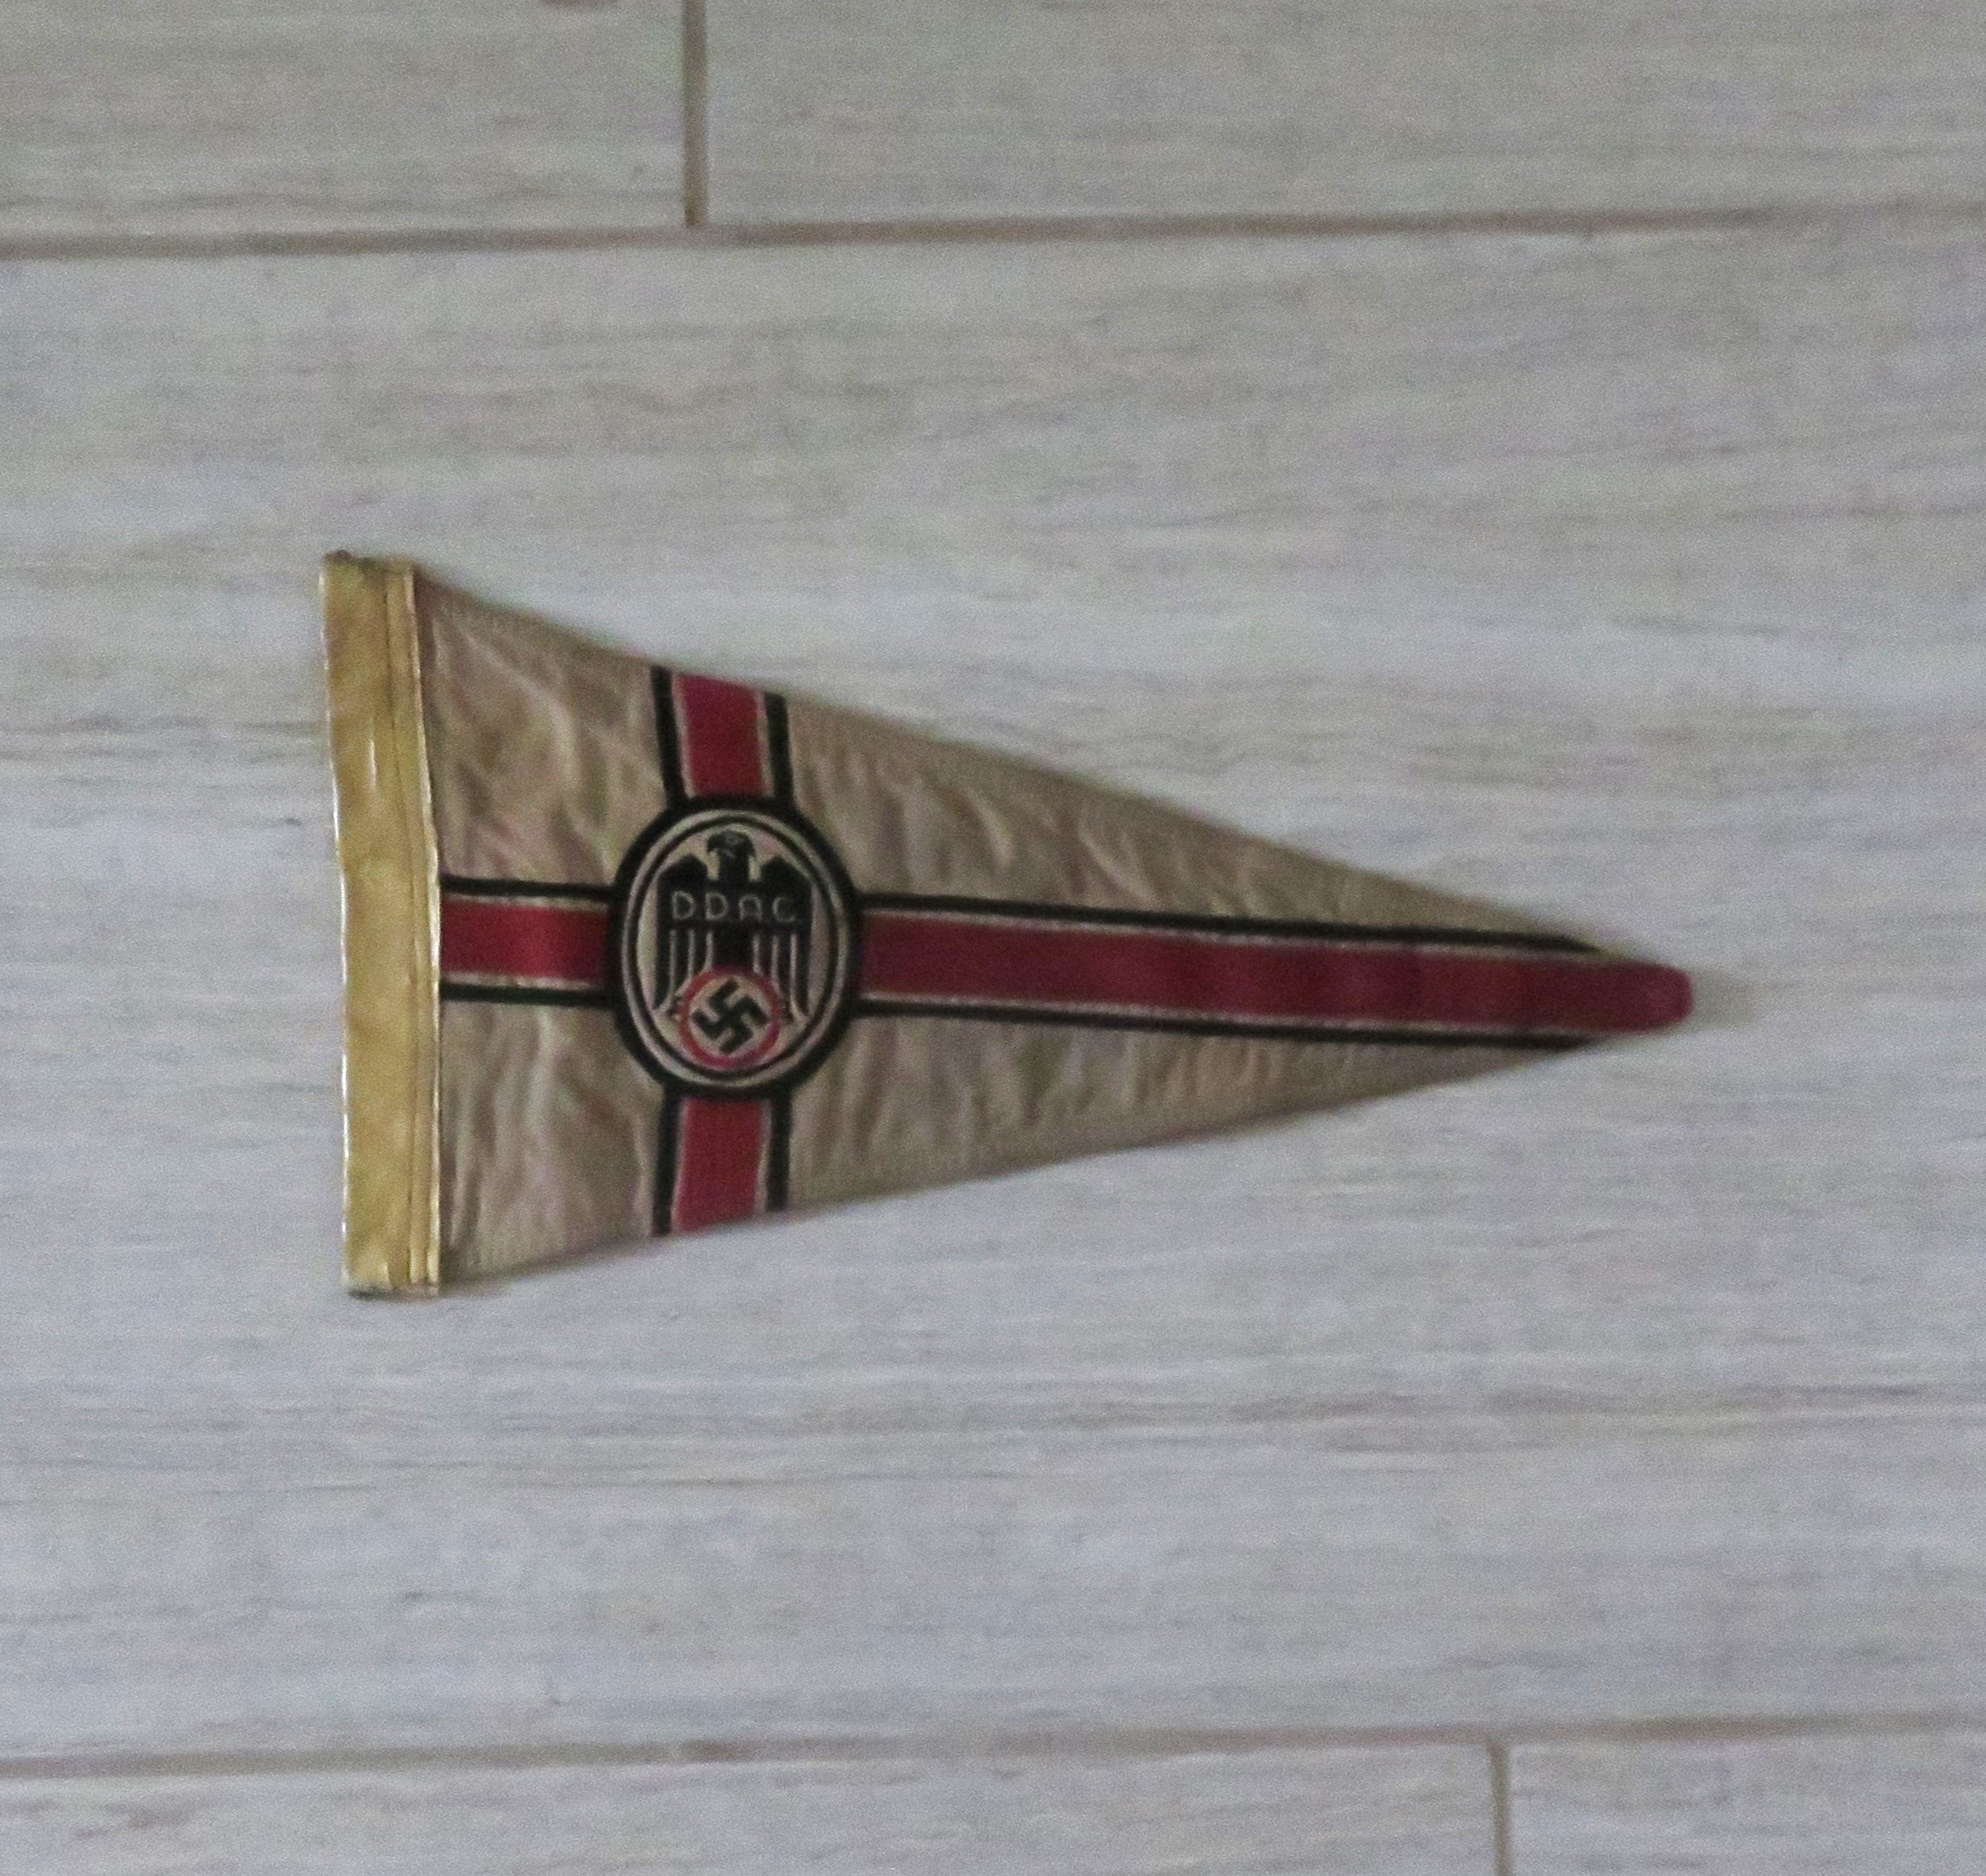 Germany. D,D,A.C. Vehicle Pennant — WW2 Collectors World